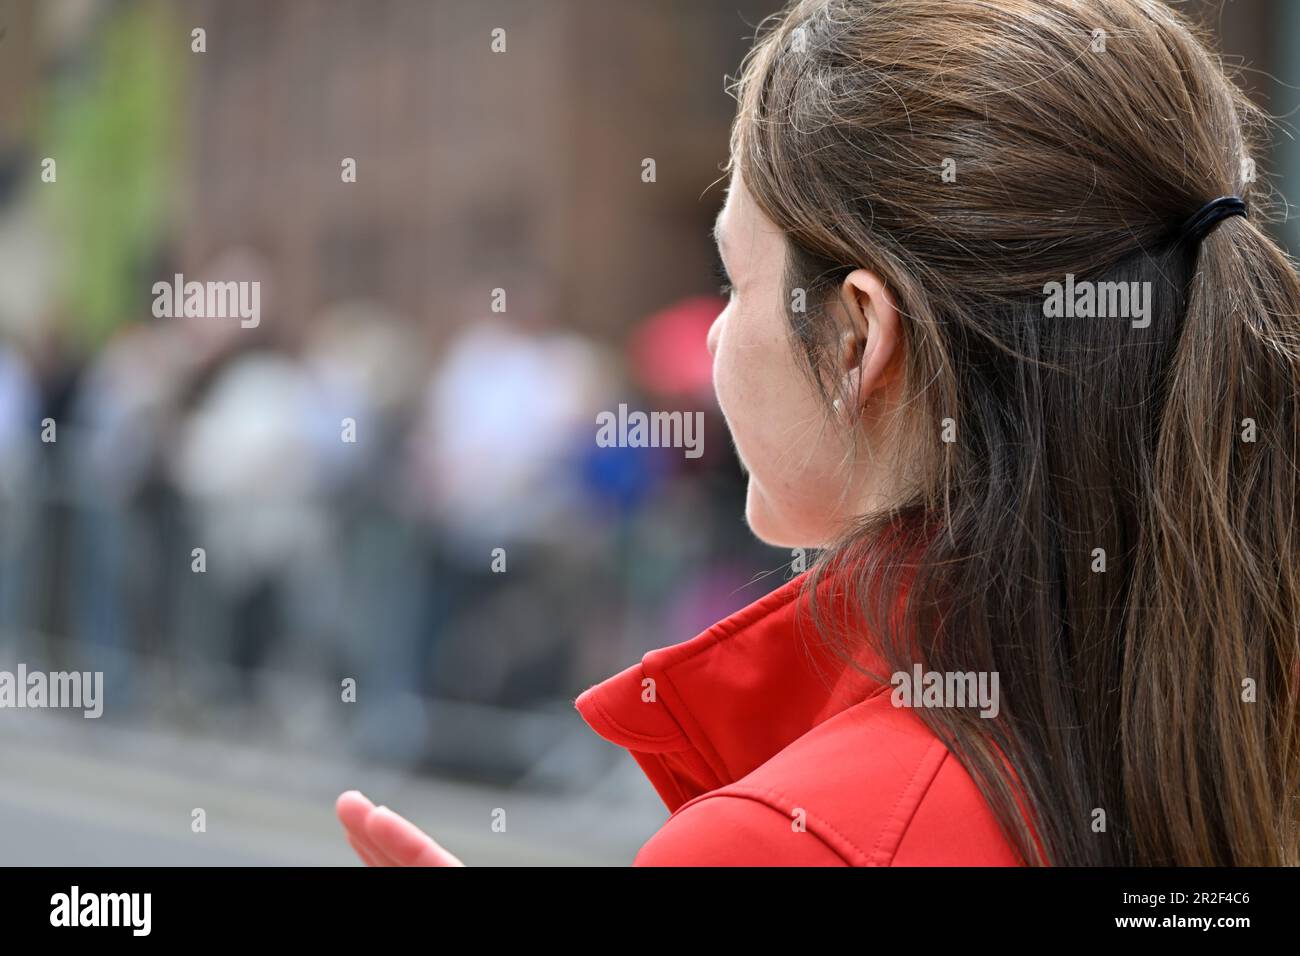 Side view young woman with brown hair some in pony tail looking away Stock Photo